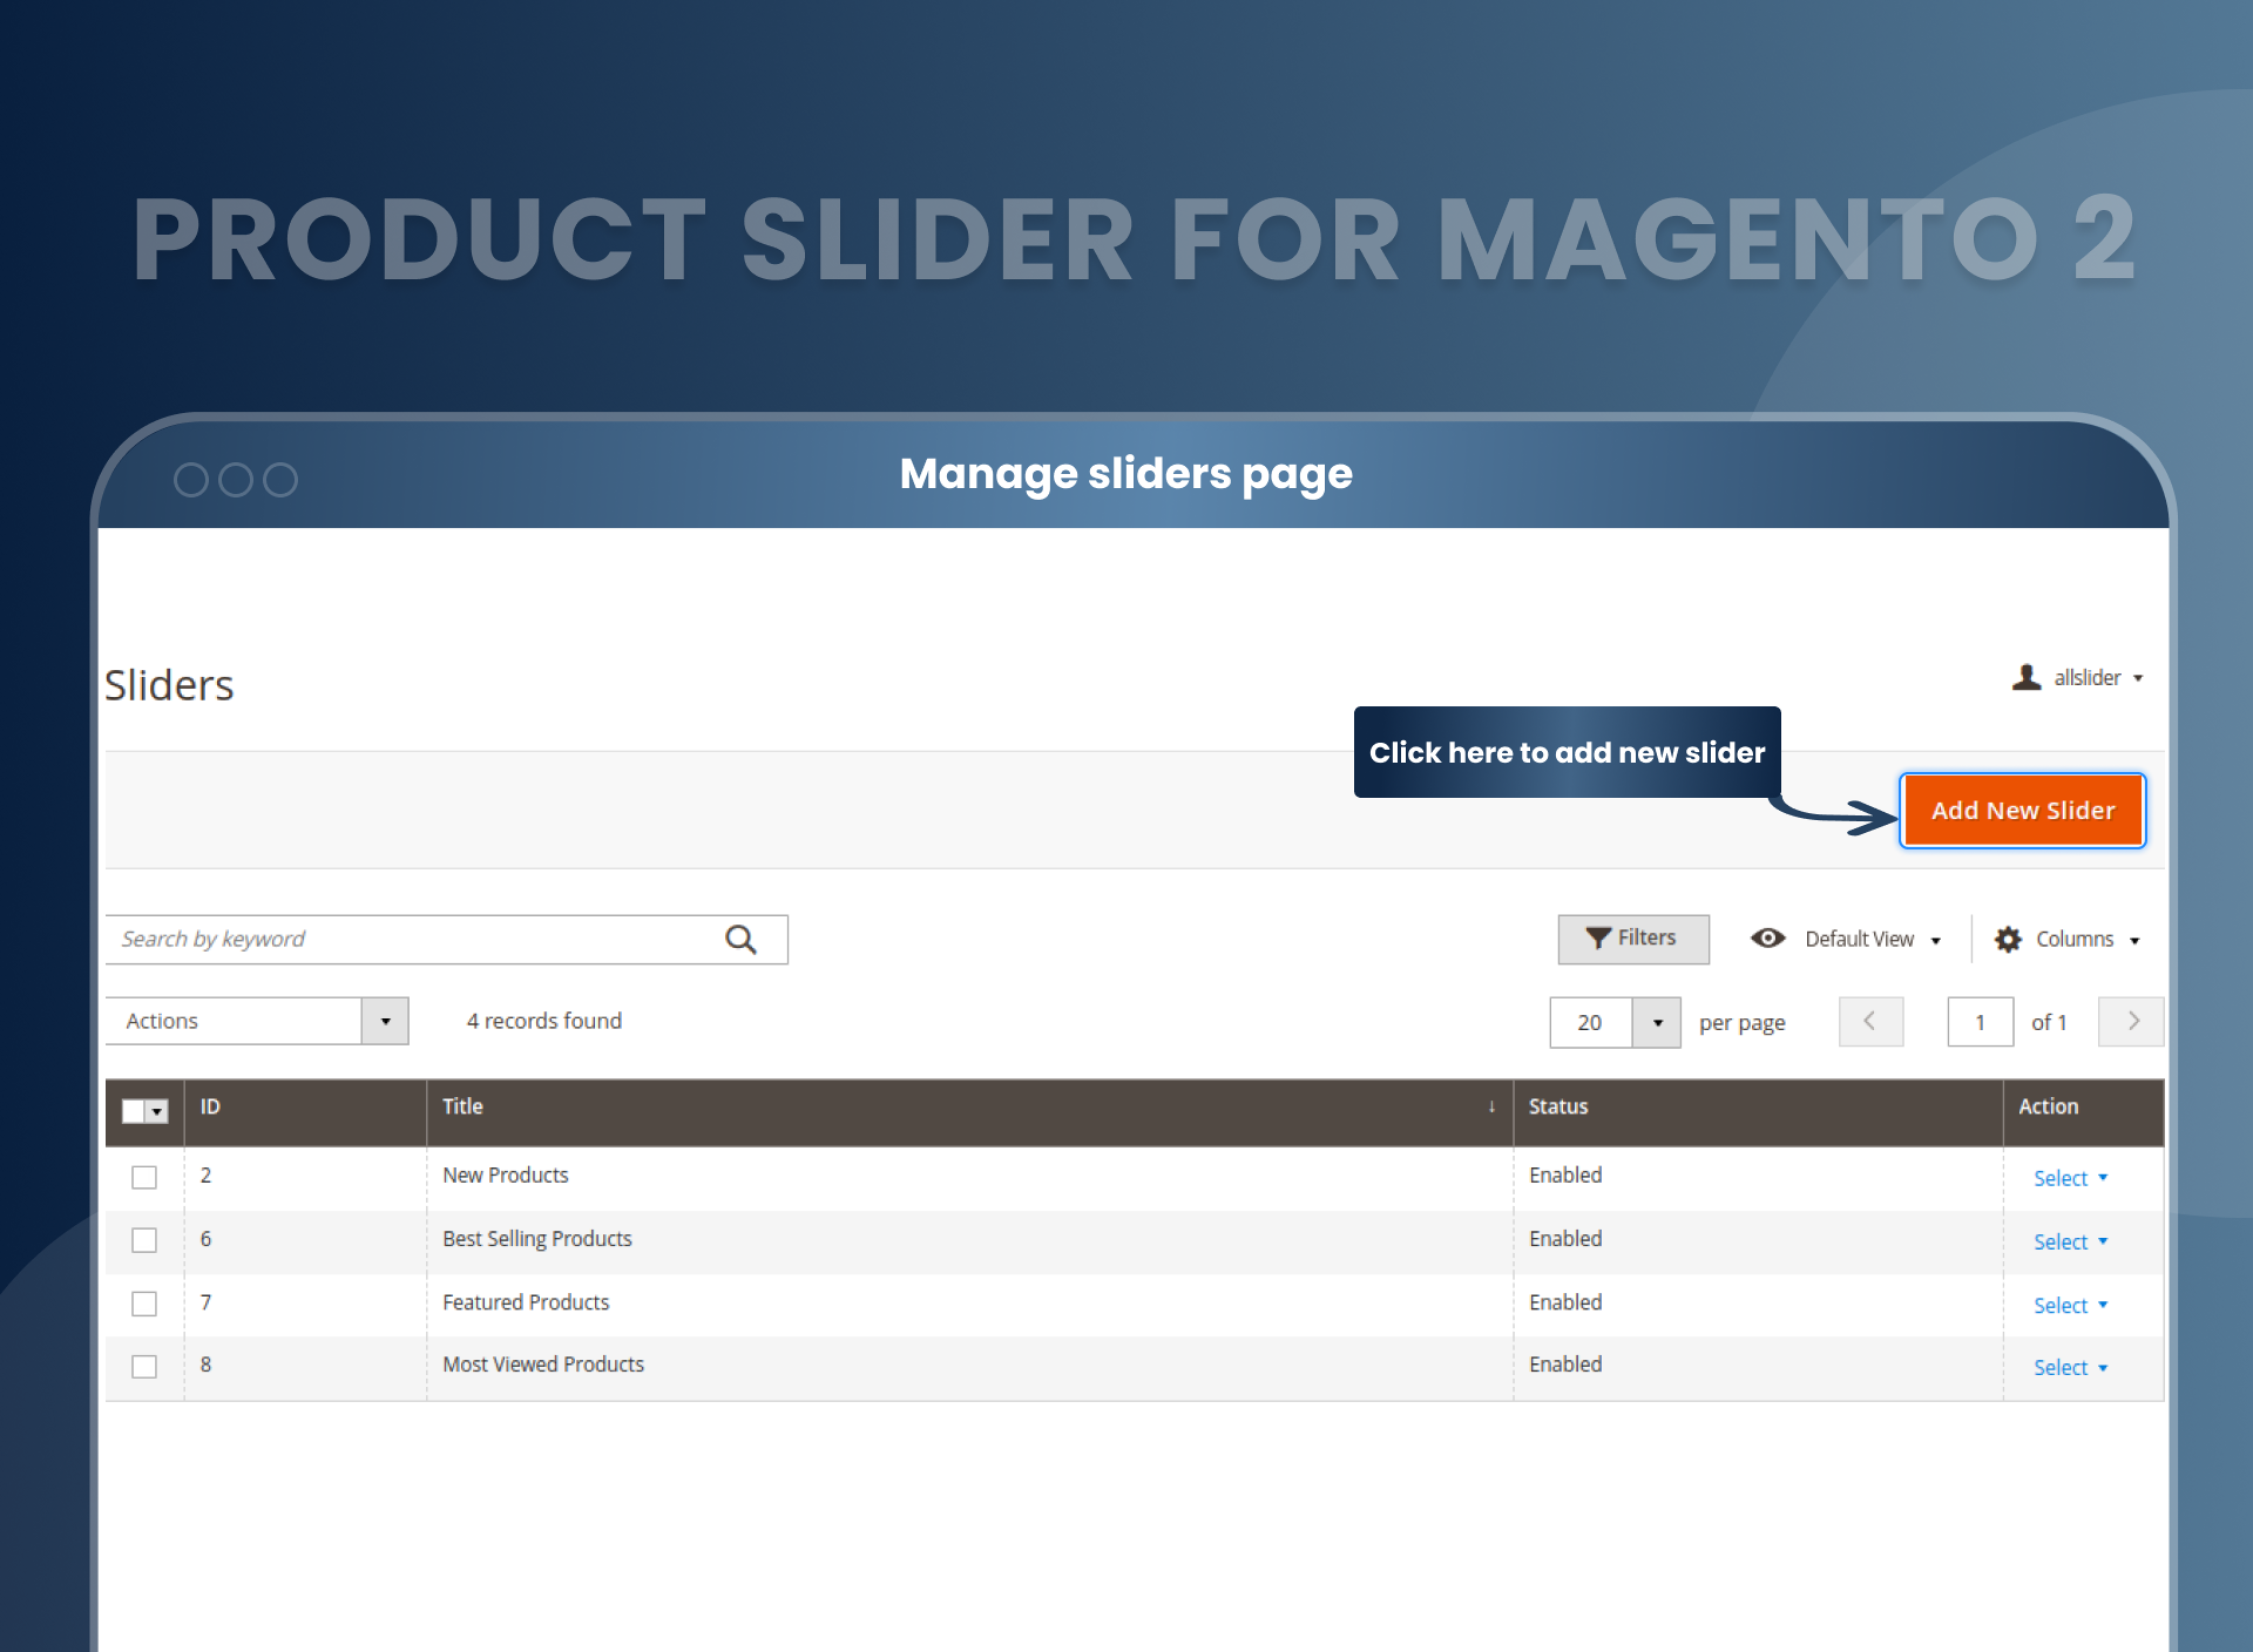 Manage sliders page